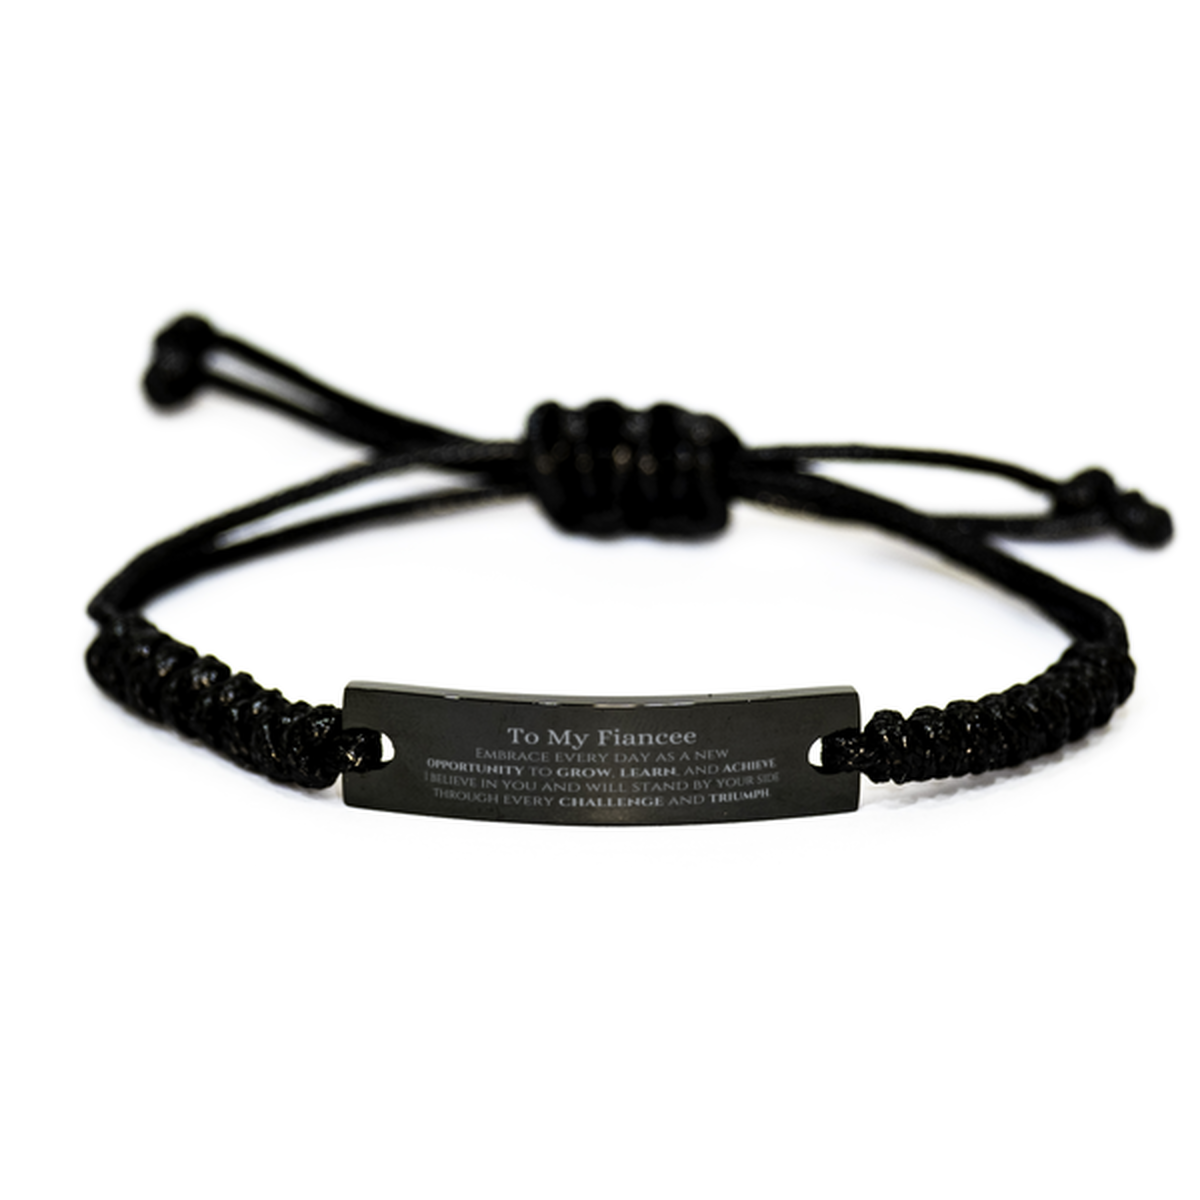 To My Fiancee Gifts, I believe in you and will stand by your side, Inspirational Black Rope Bracelet For Fiancee, Birthday Christmas Motivational Fiancee Gifts